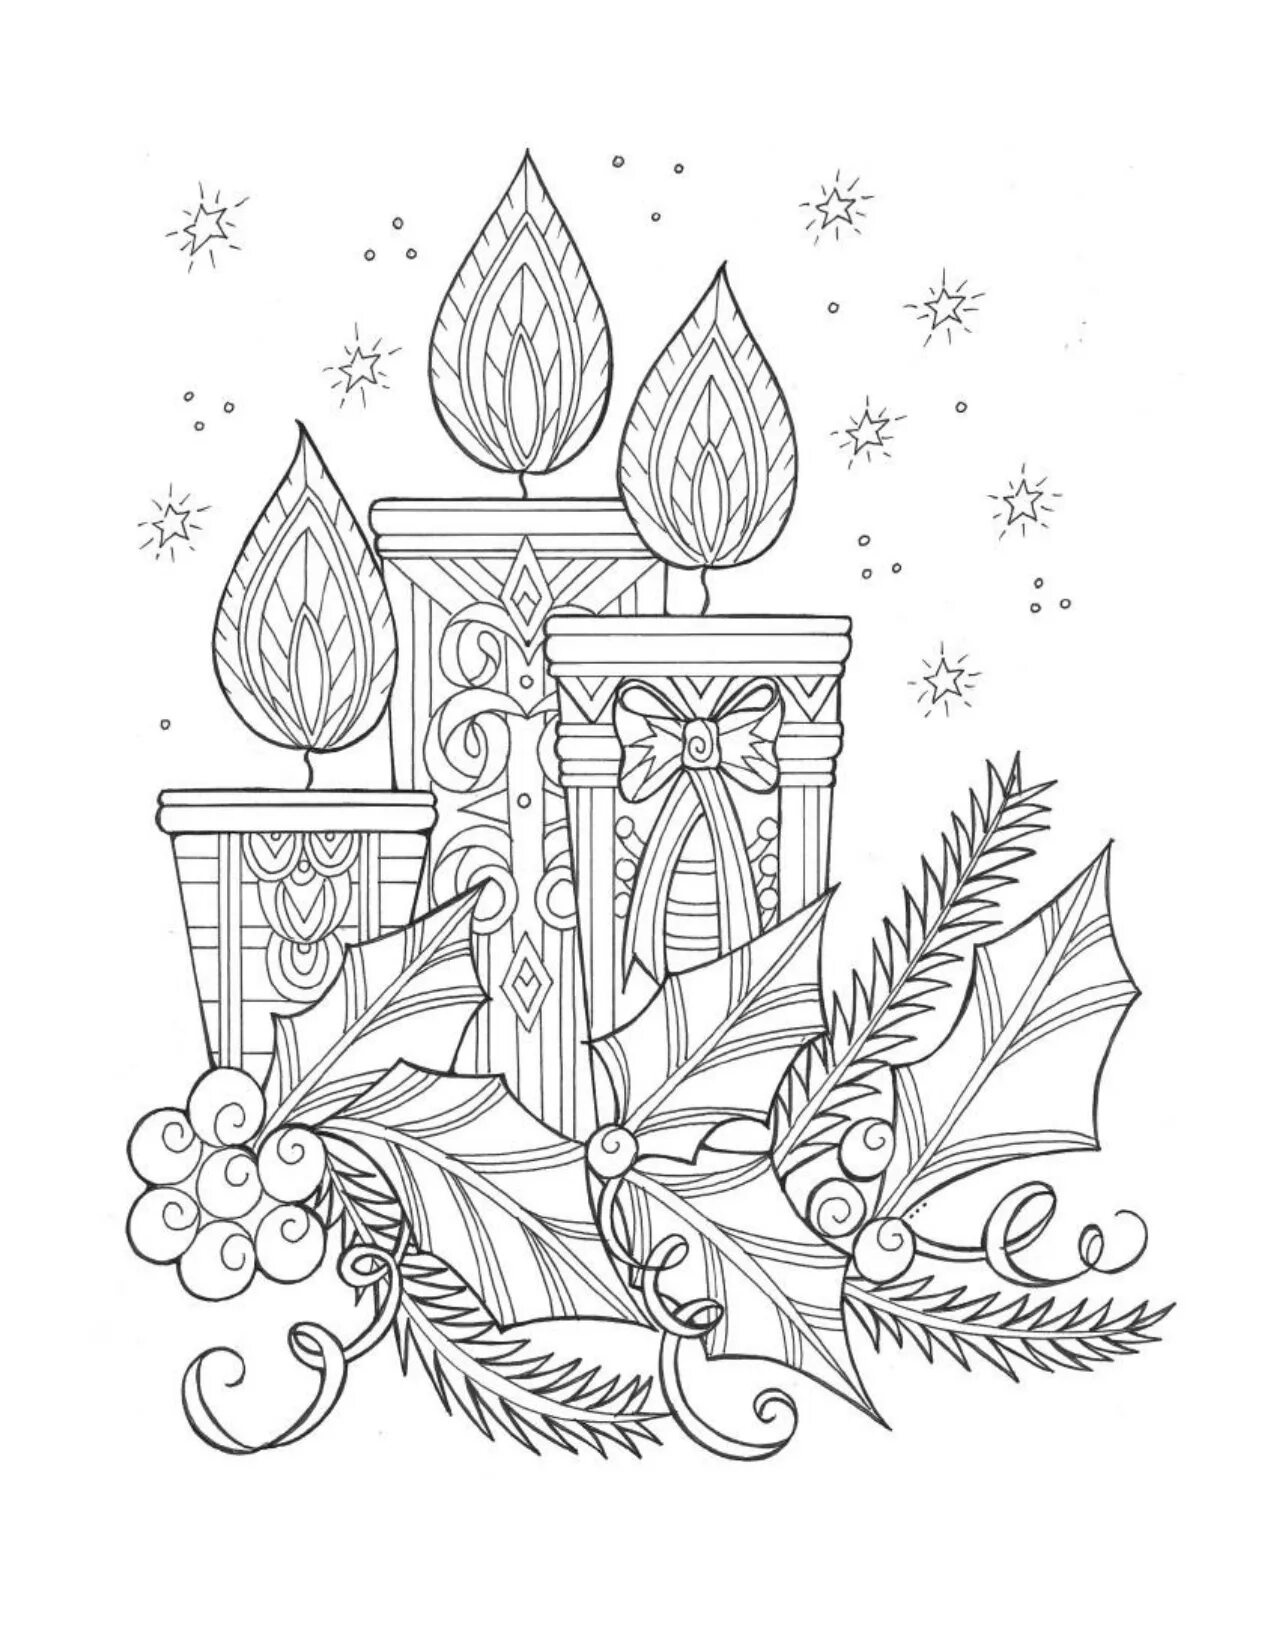 Vivacious coloring page stress relief christmas